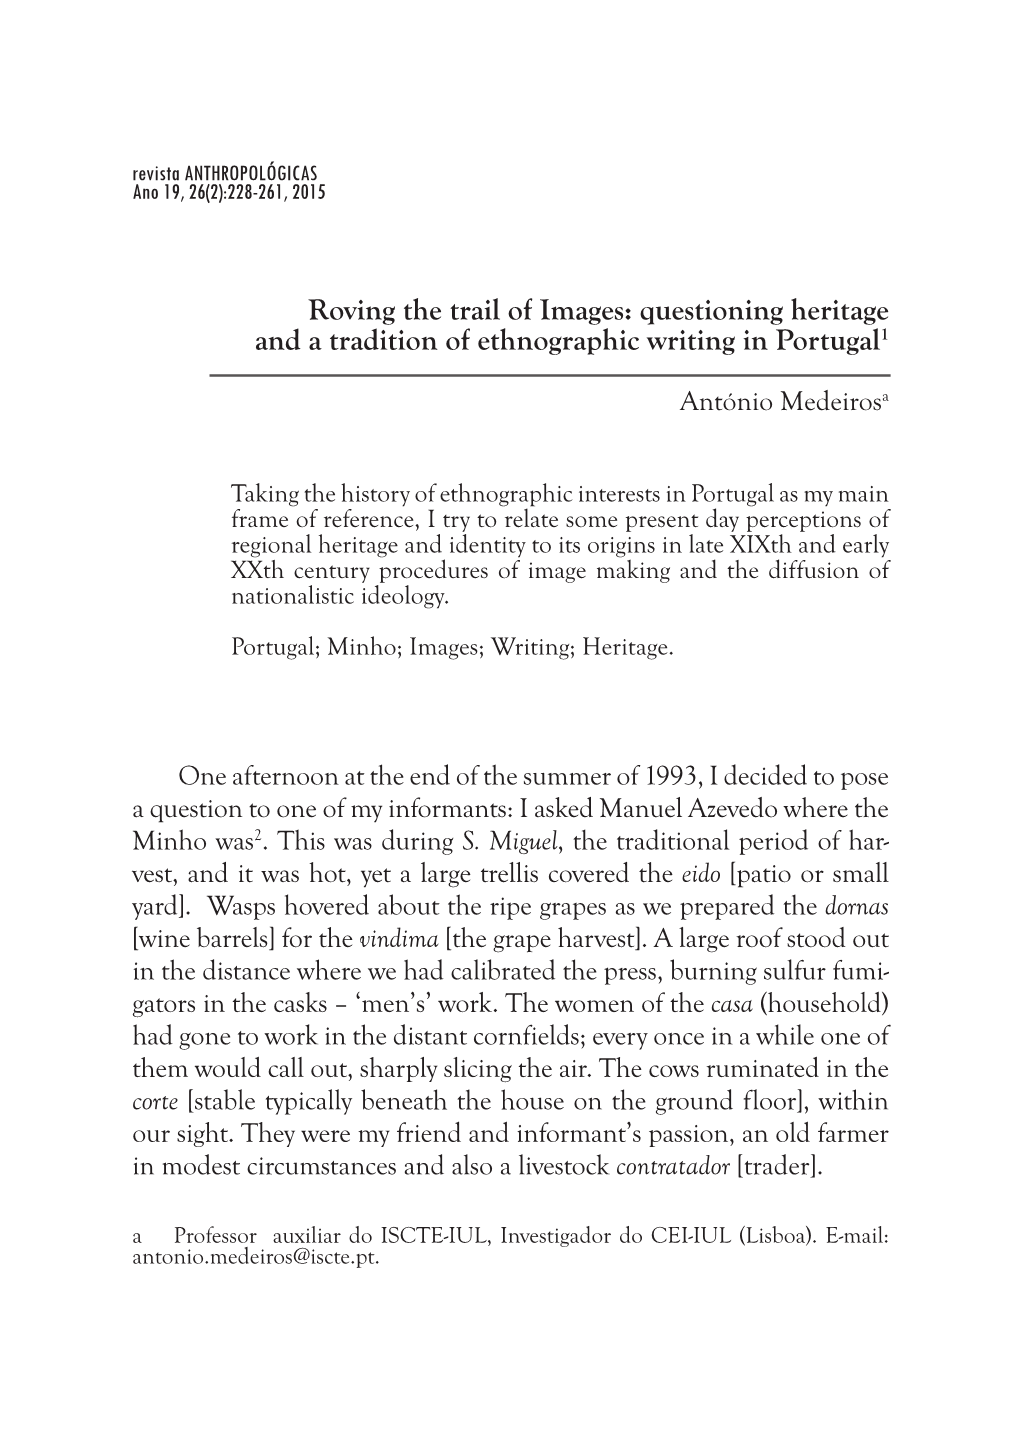 Questioning Heritage and a Tradition of Ethnographic Writing in Portugal1